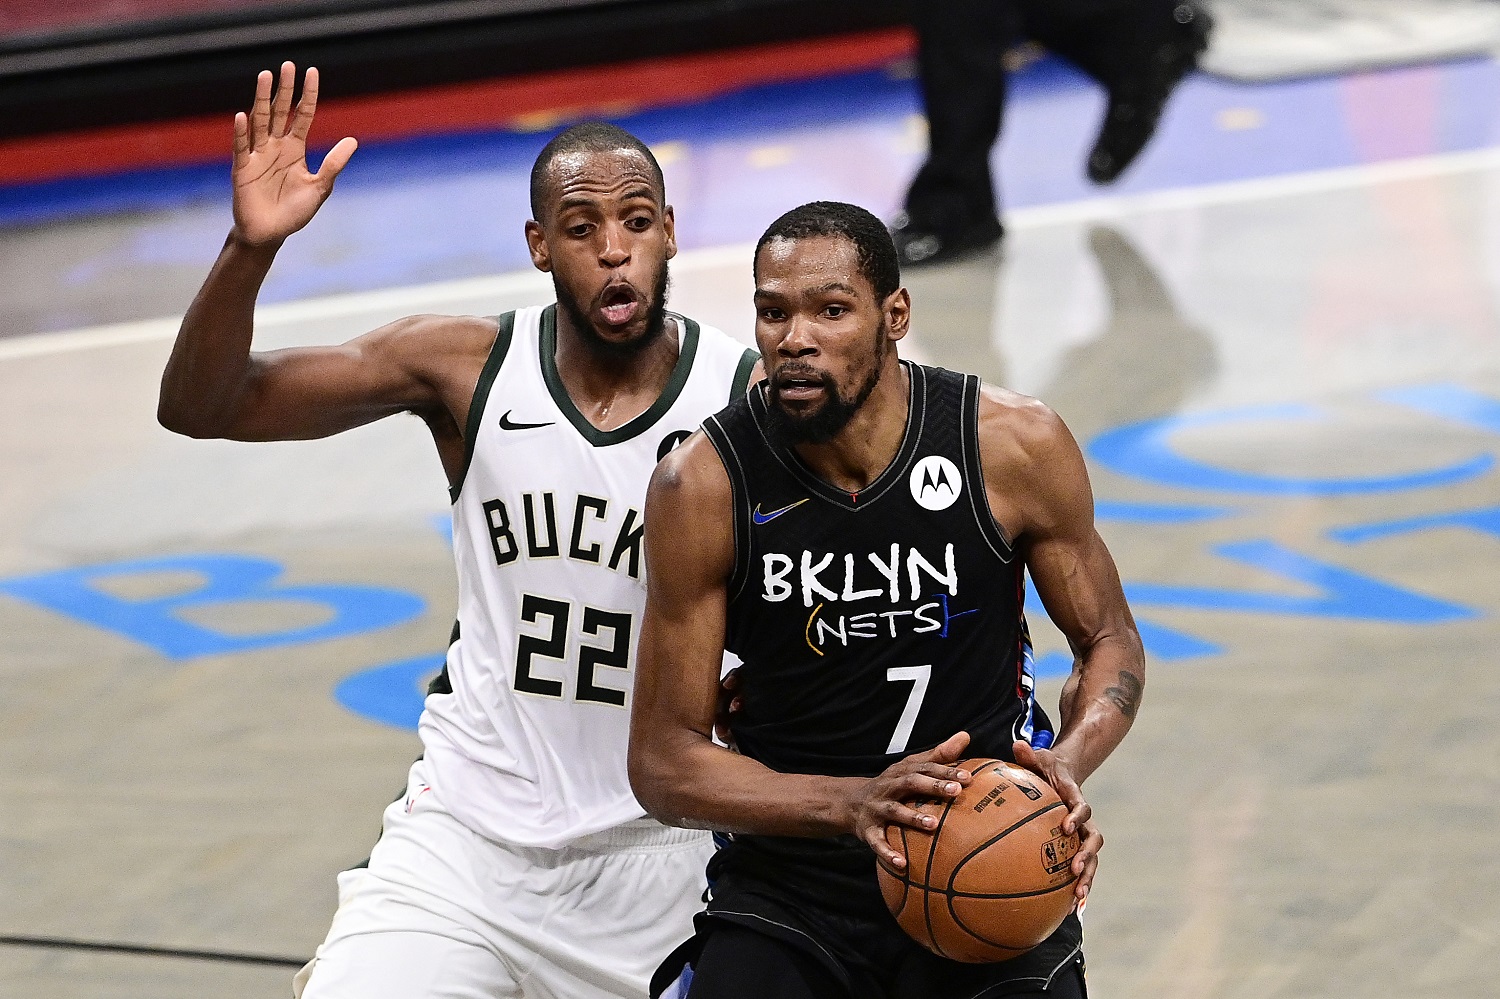 Khris Middleton, left, and Kevin Durant, right, will represent the United States in the men's basketball tournament at the Tokyo Olympics. | Steven Ryan/Getty Images